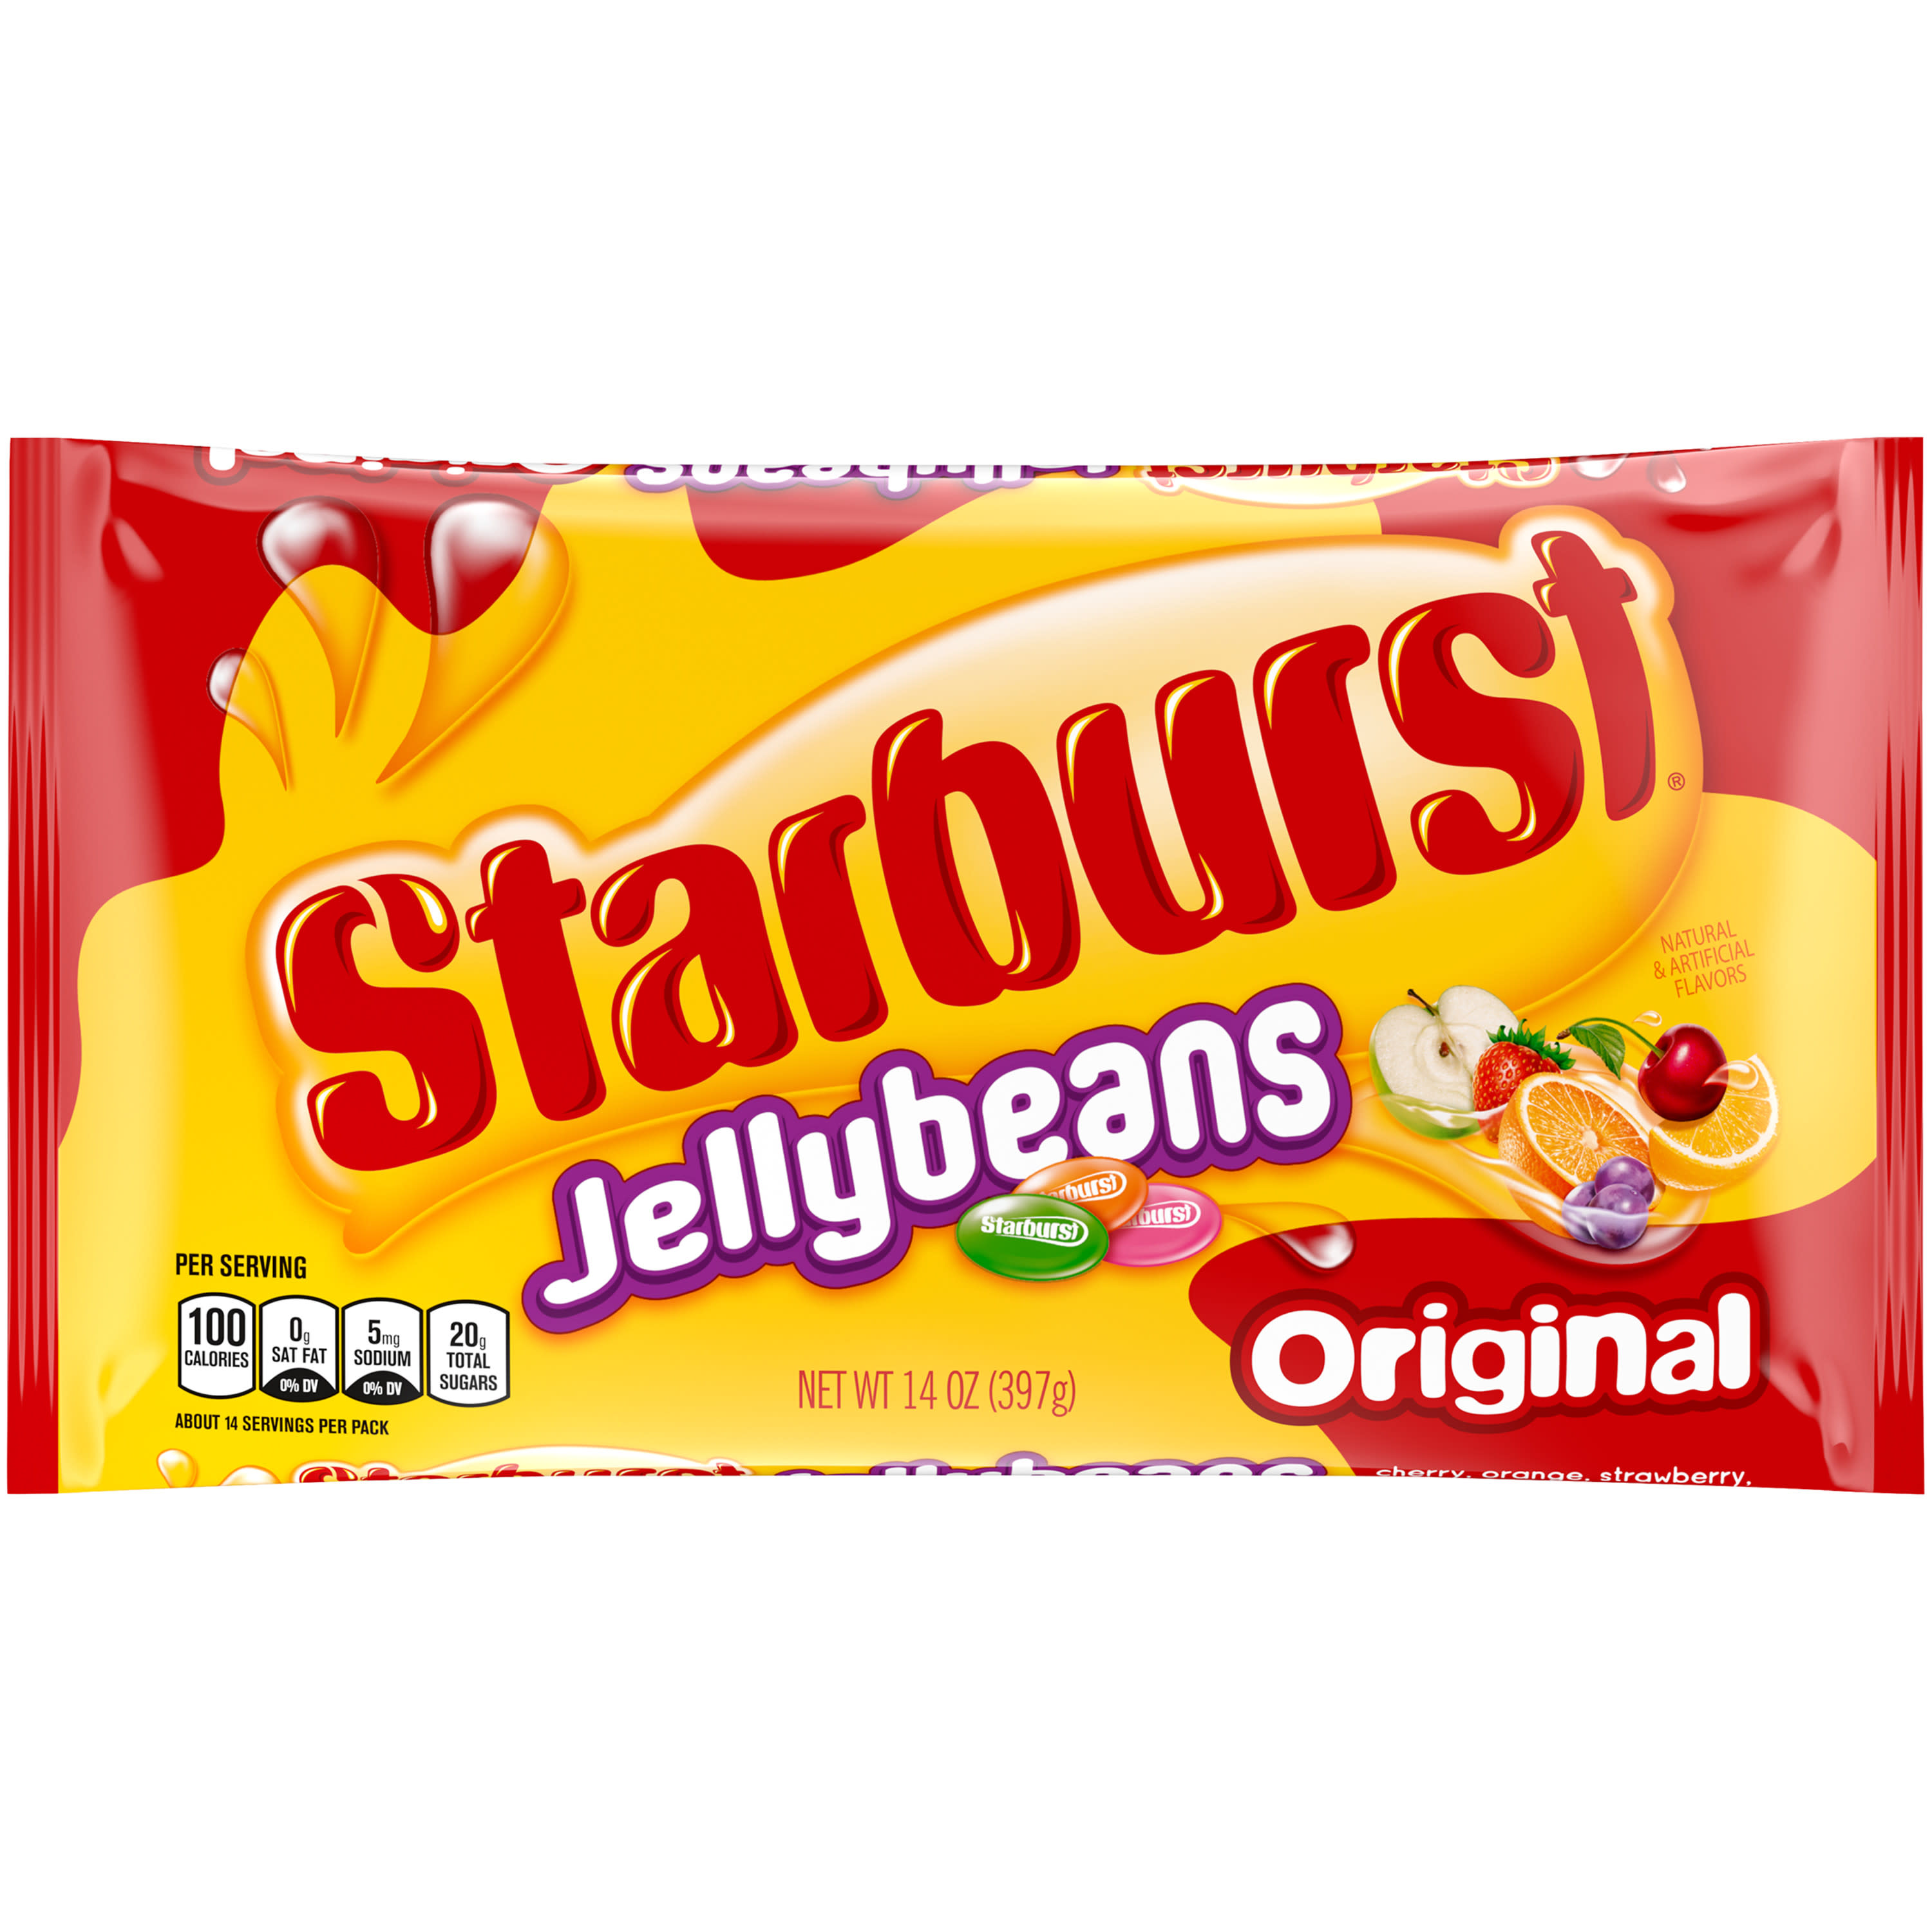 Starburst Original Jelly Beans Chewy Candy - 14 oz Bag - image 1 of 15